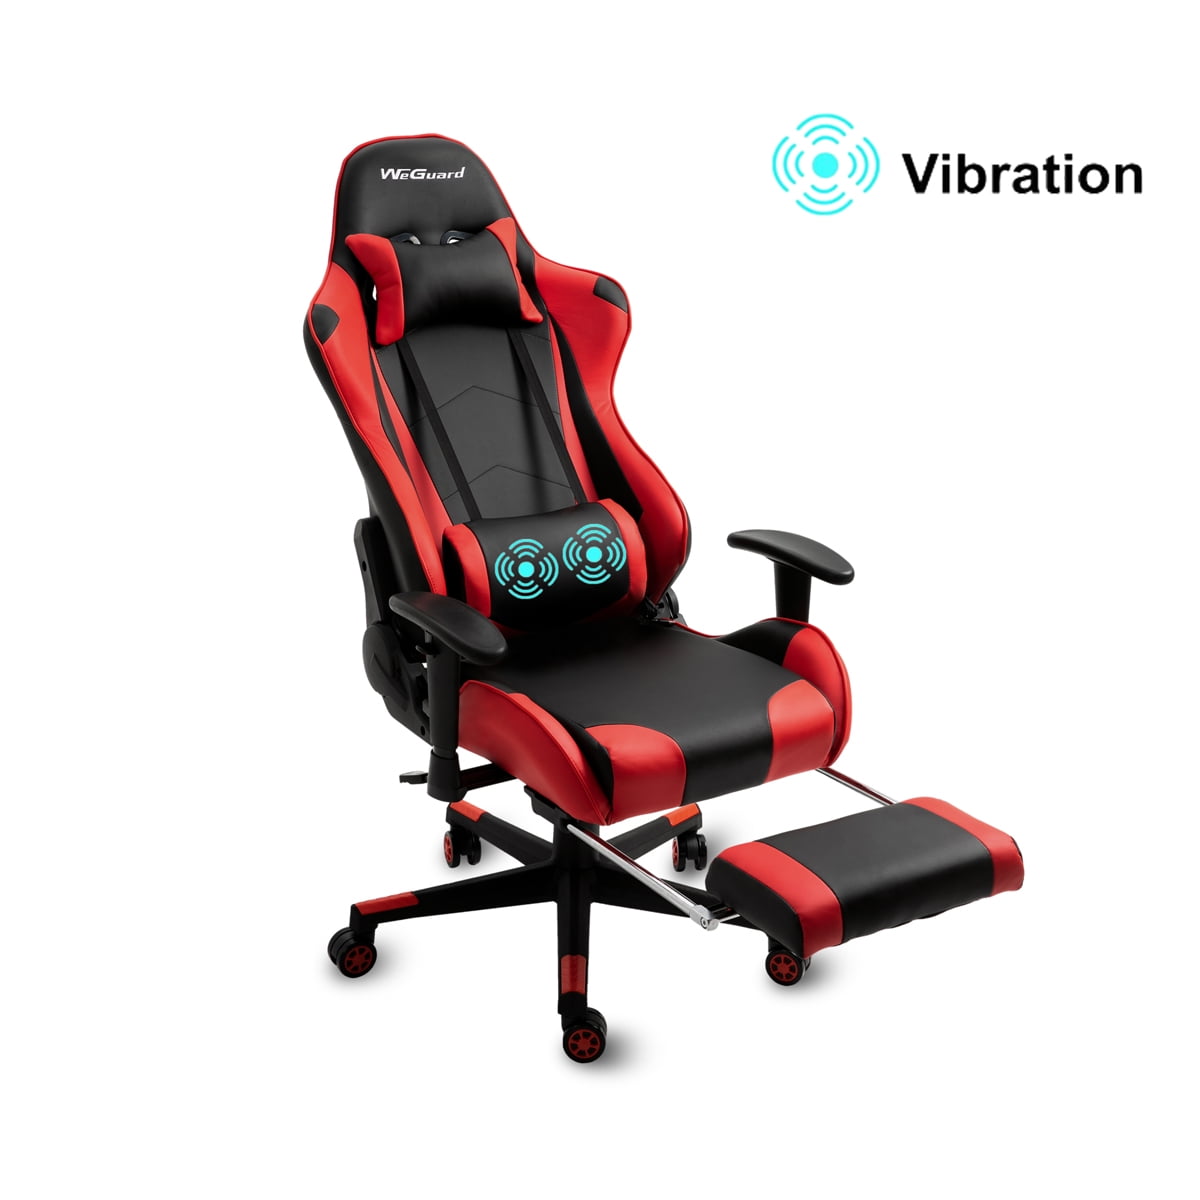 GOLDORO Gaming Chair Computer Chair Ergonomic High Back PU Leather with Adjustable Armrest and Back Recliner Swivel Rocker Office Chair Black Red